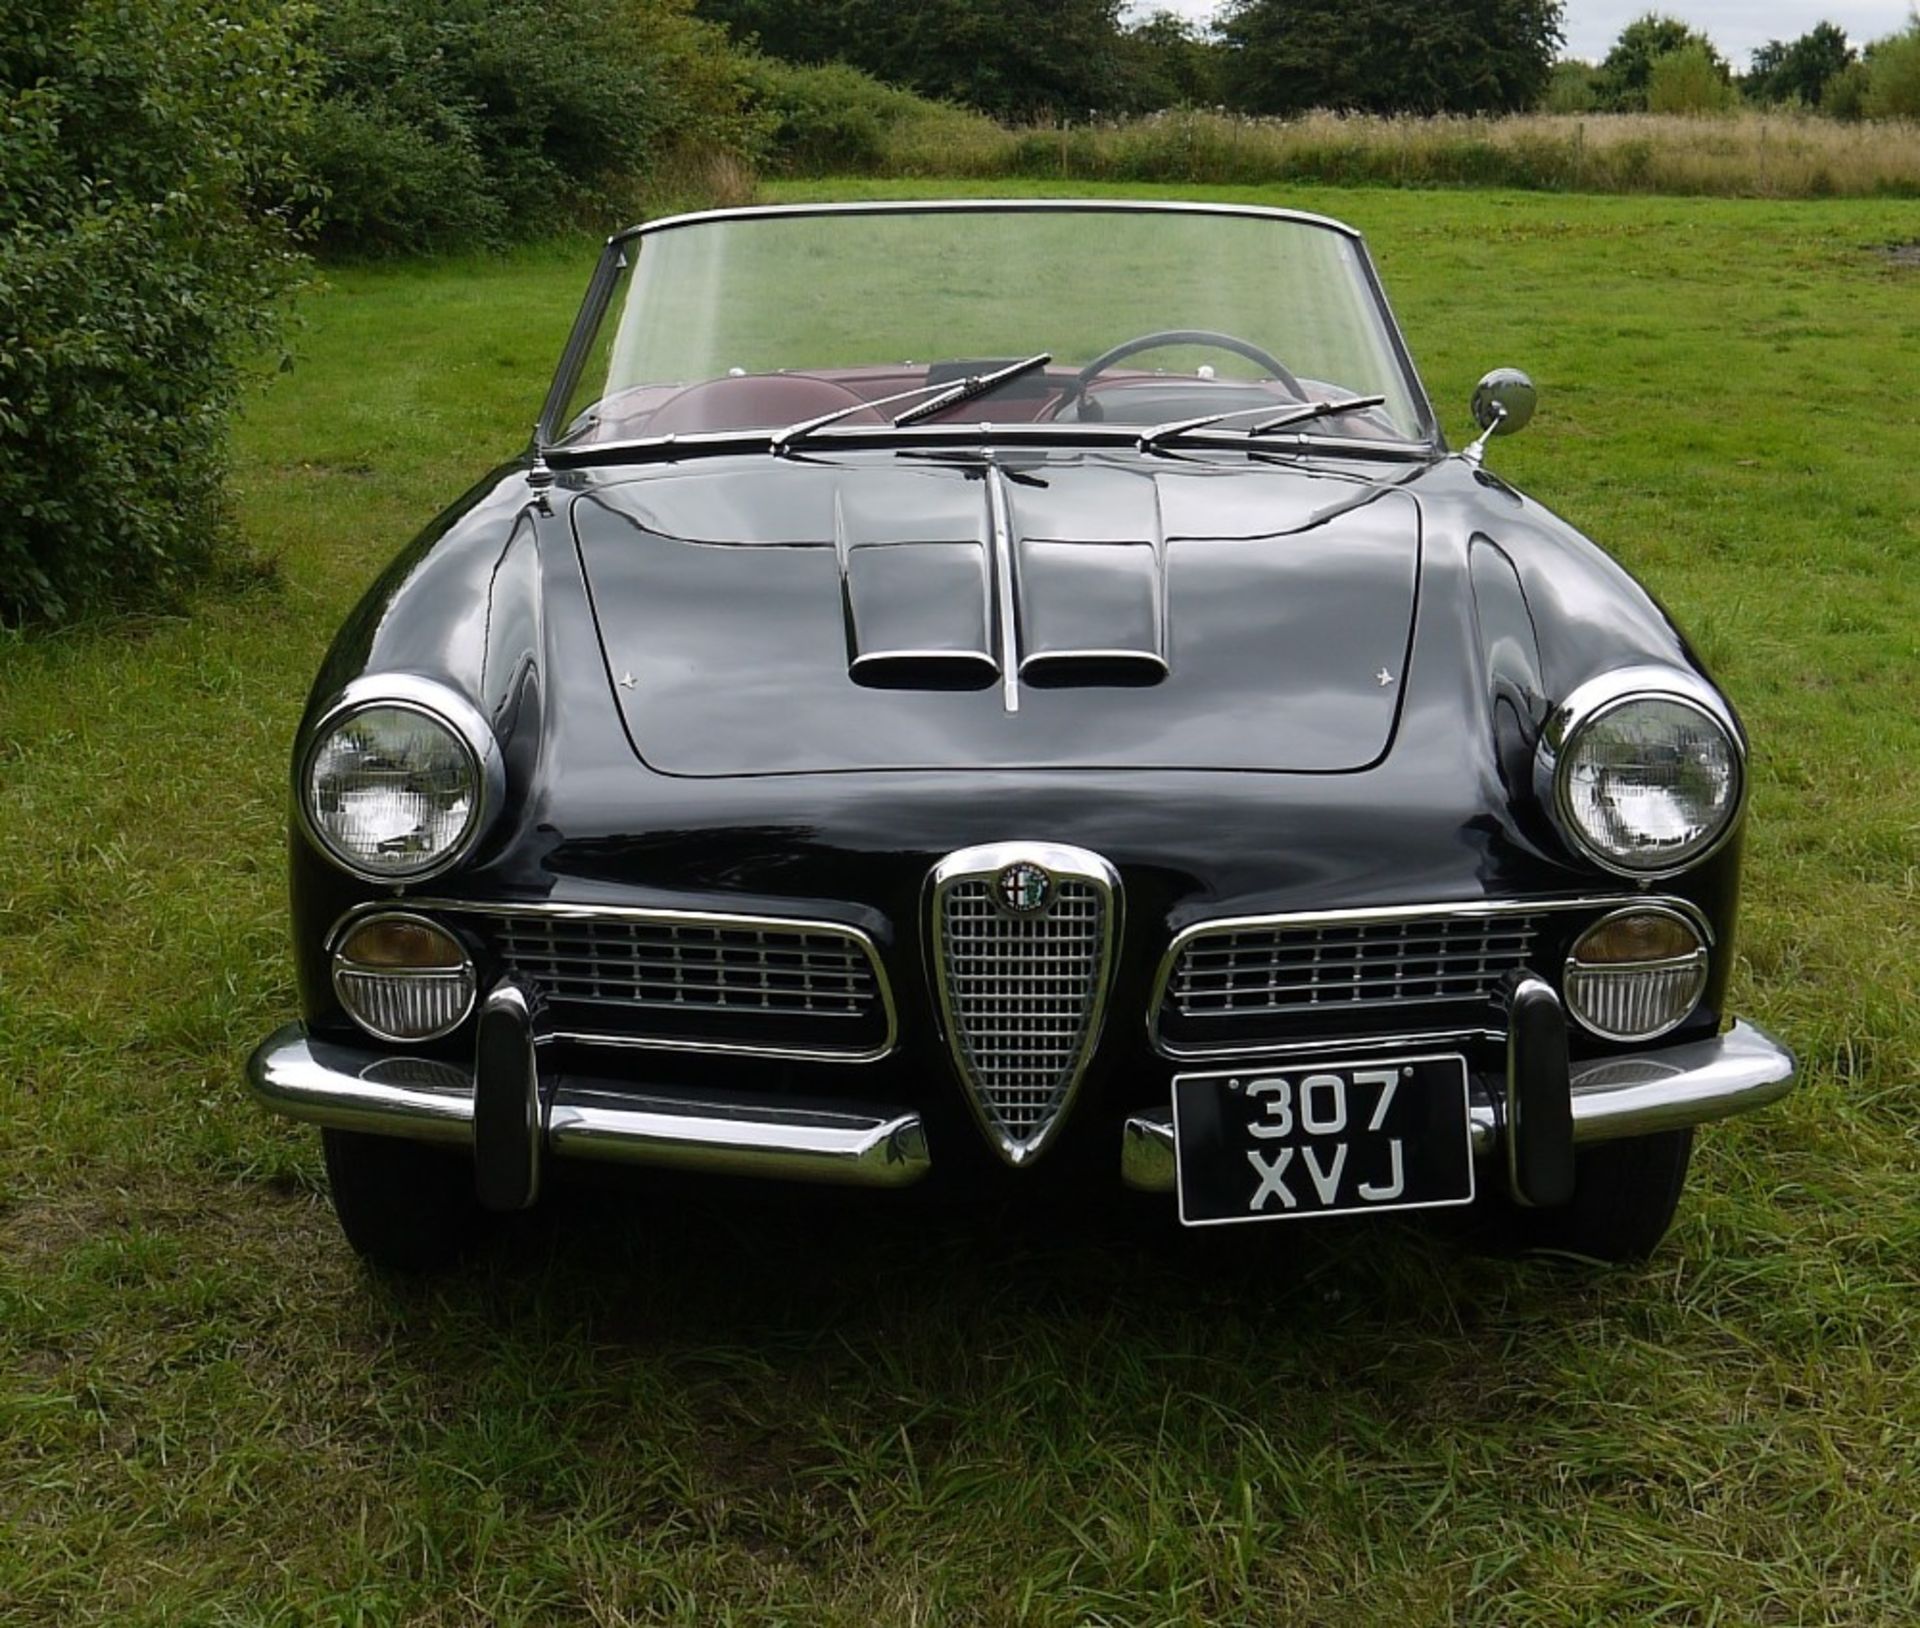 1960 ALFA ROMEO TOURING SPIDER Registration Number: 307 XVJ Chassis Number: AR*10204*000517 Recorded - Image 2 of 36